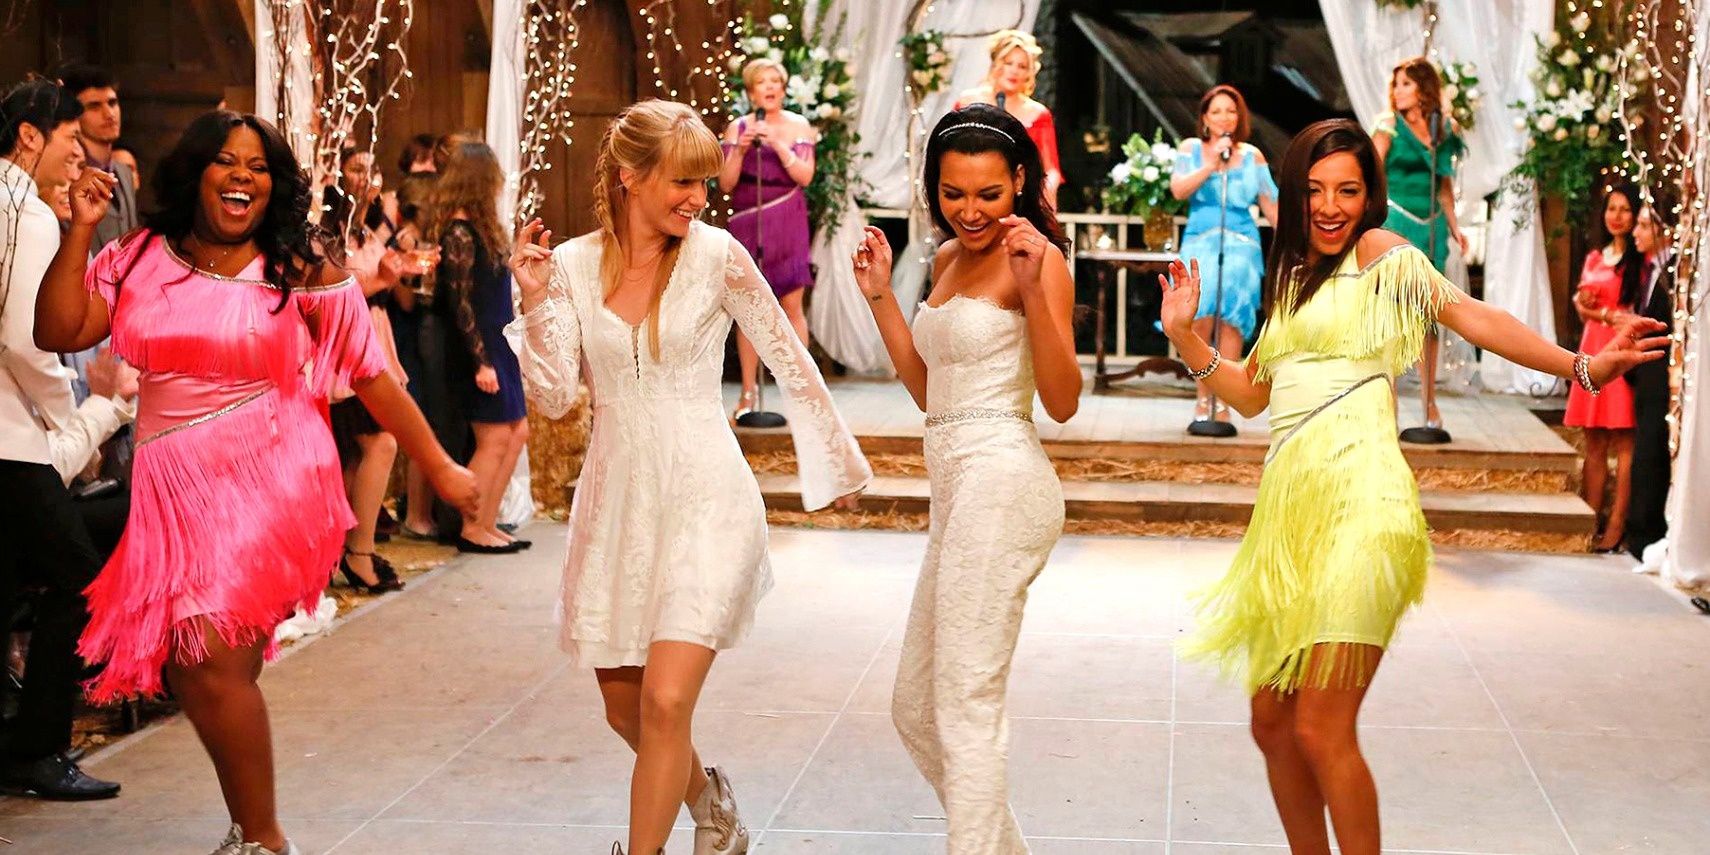 Brittany and Santana's wedding in Glee